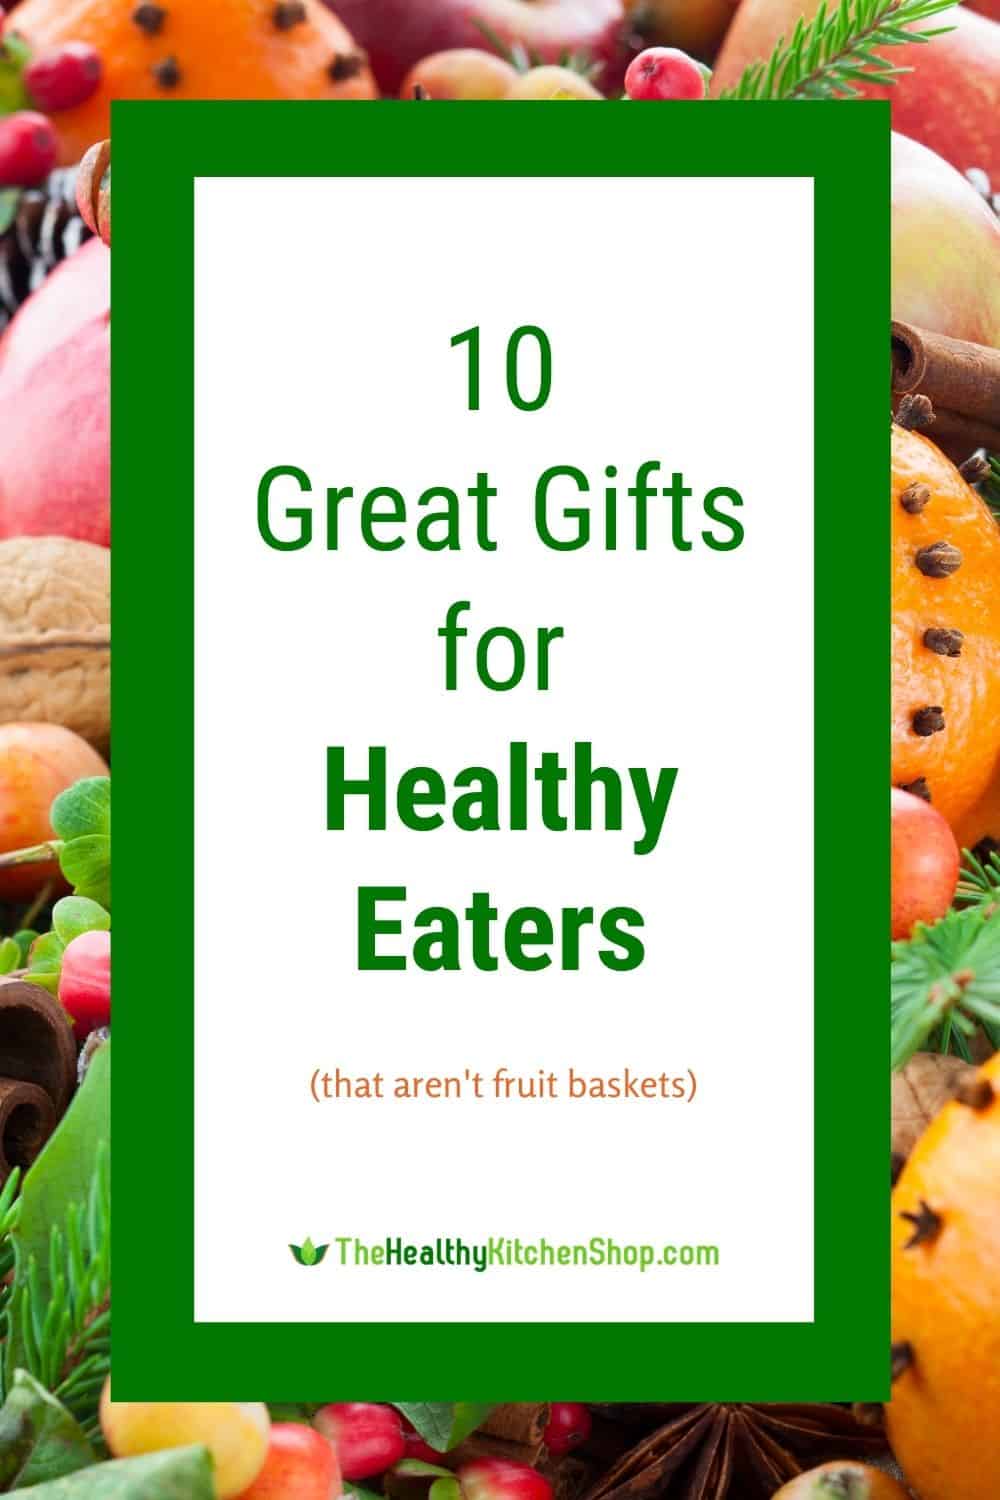 10 Great Gifts for Healthy Eaters